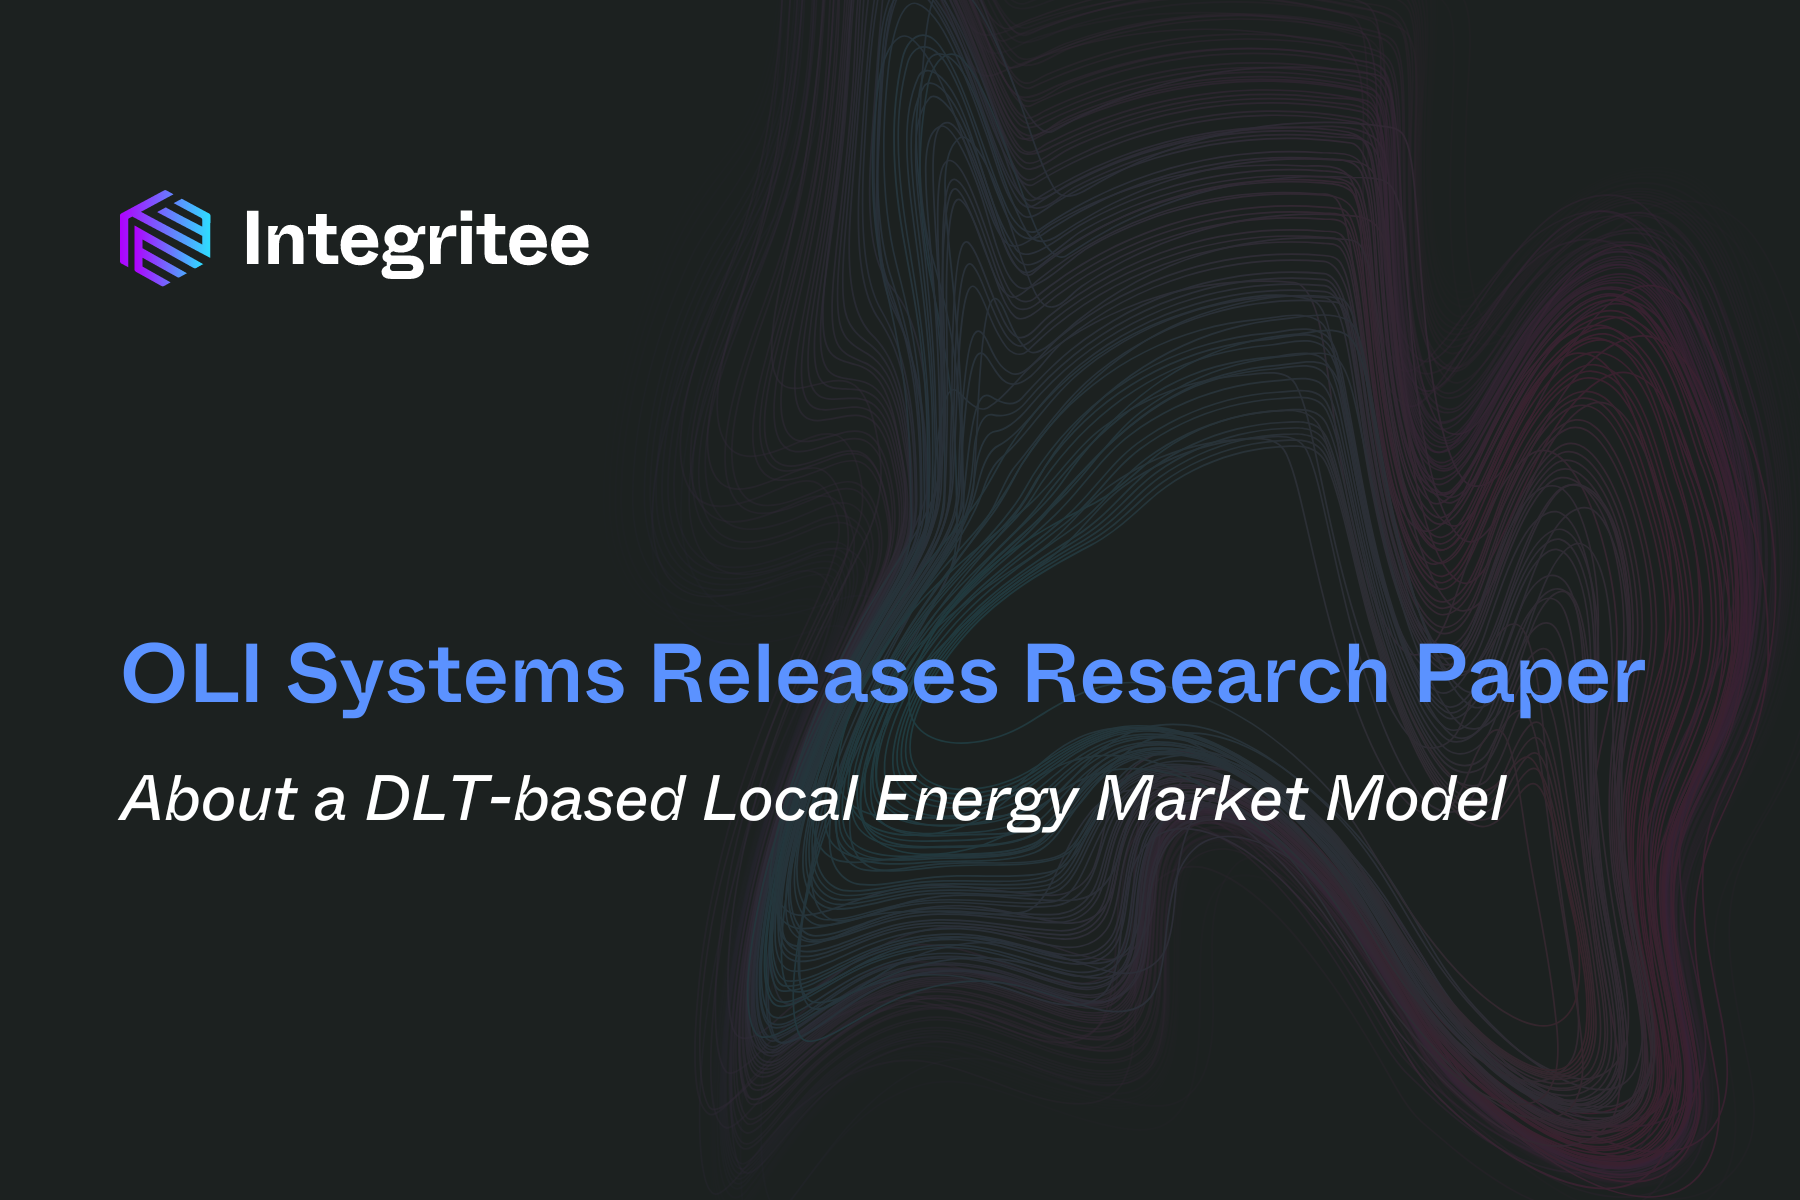 OLI Systems Releases Research Paper about a DLT-Based Local Energy Market Model